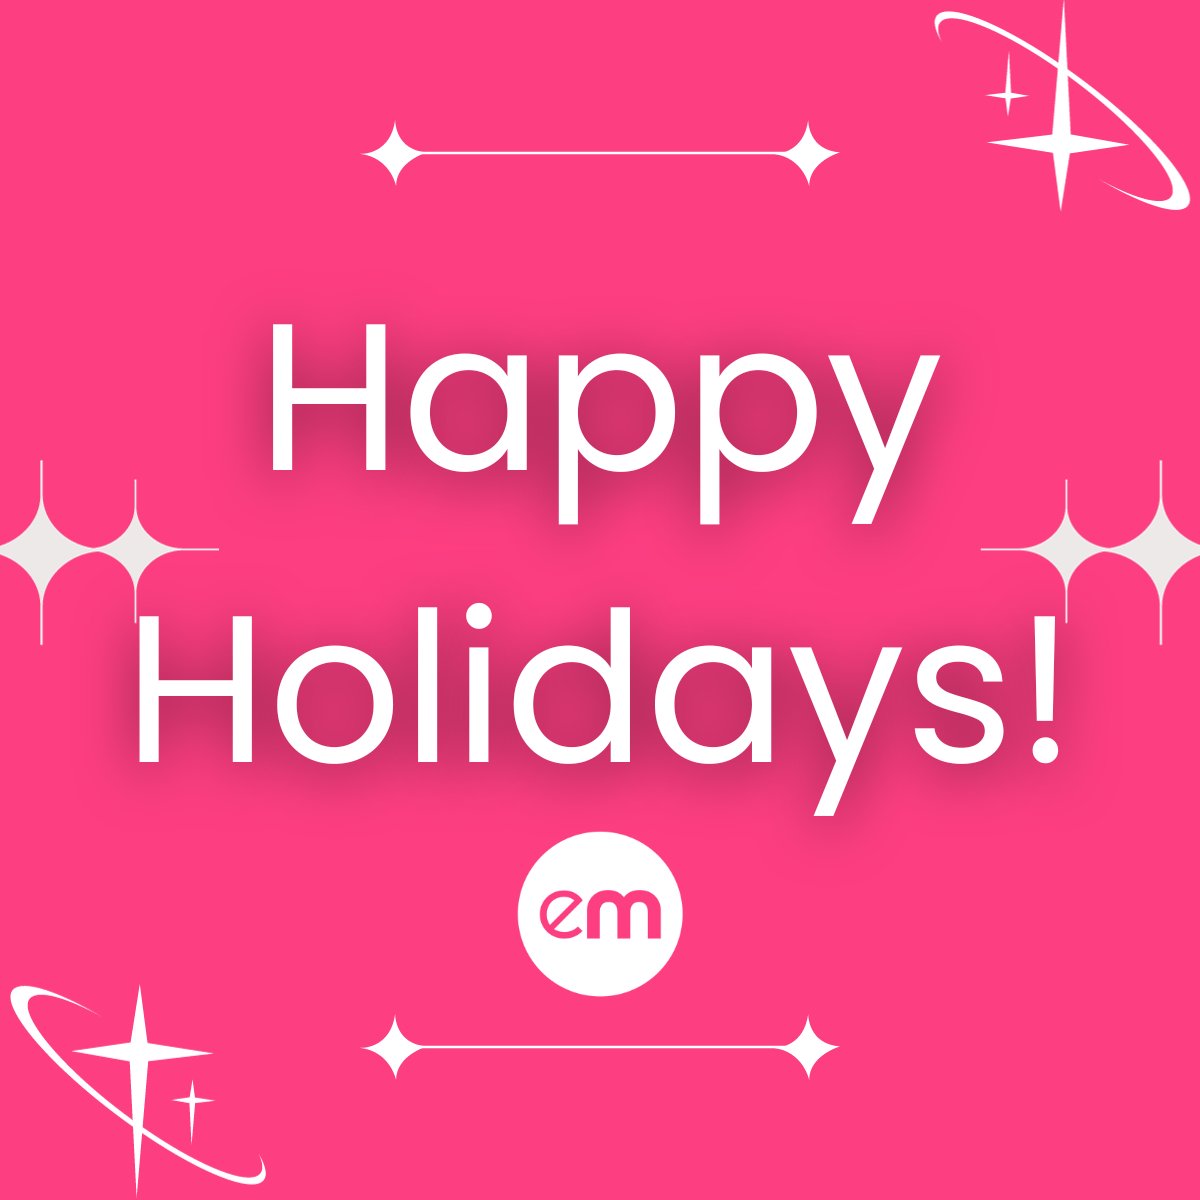 2023 has been a landmark year for us, as we approach our first year as EssenceMediacom.   Thank you to all our brilliant clients and partners, and of course our Essentials.   We wish you all a peaceful holiday period and look forward to achieving new milestones together in 2024!